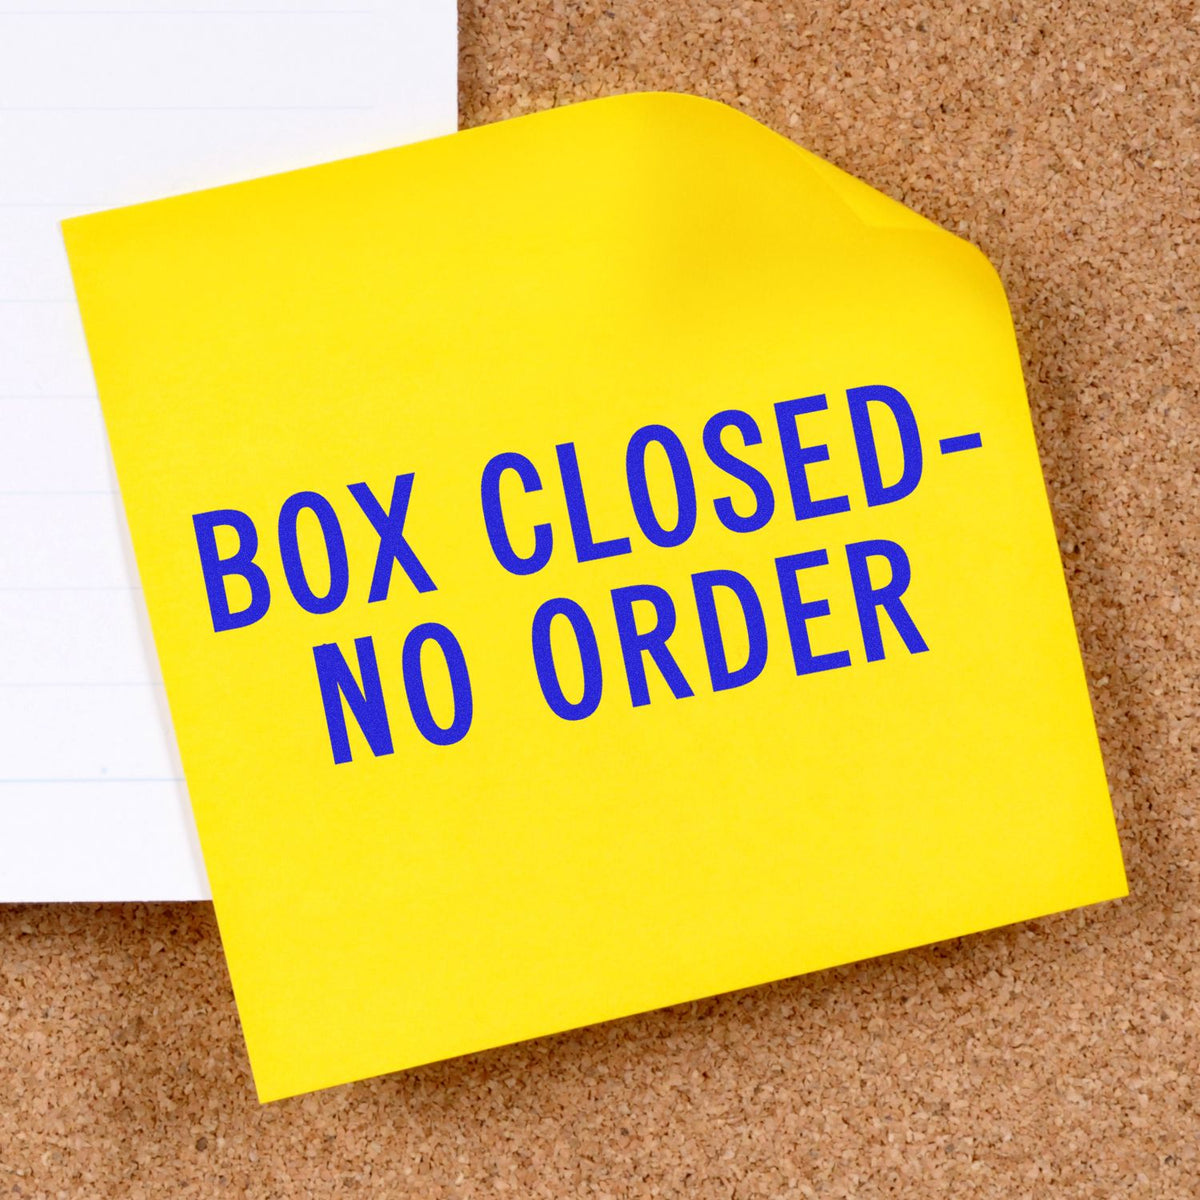 Large Box Closed No Order Rubber Stamp In Use Photo